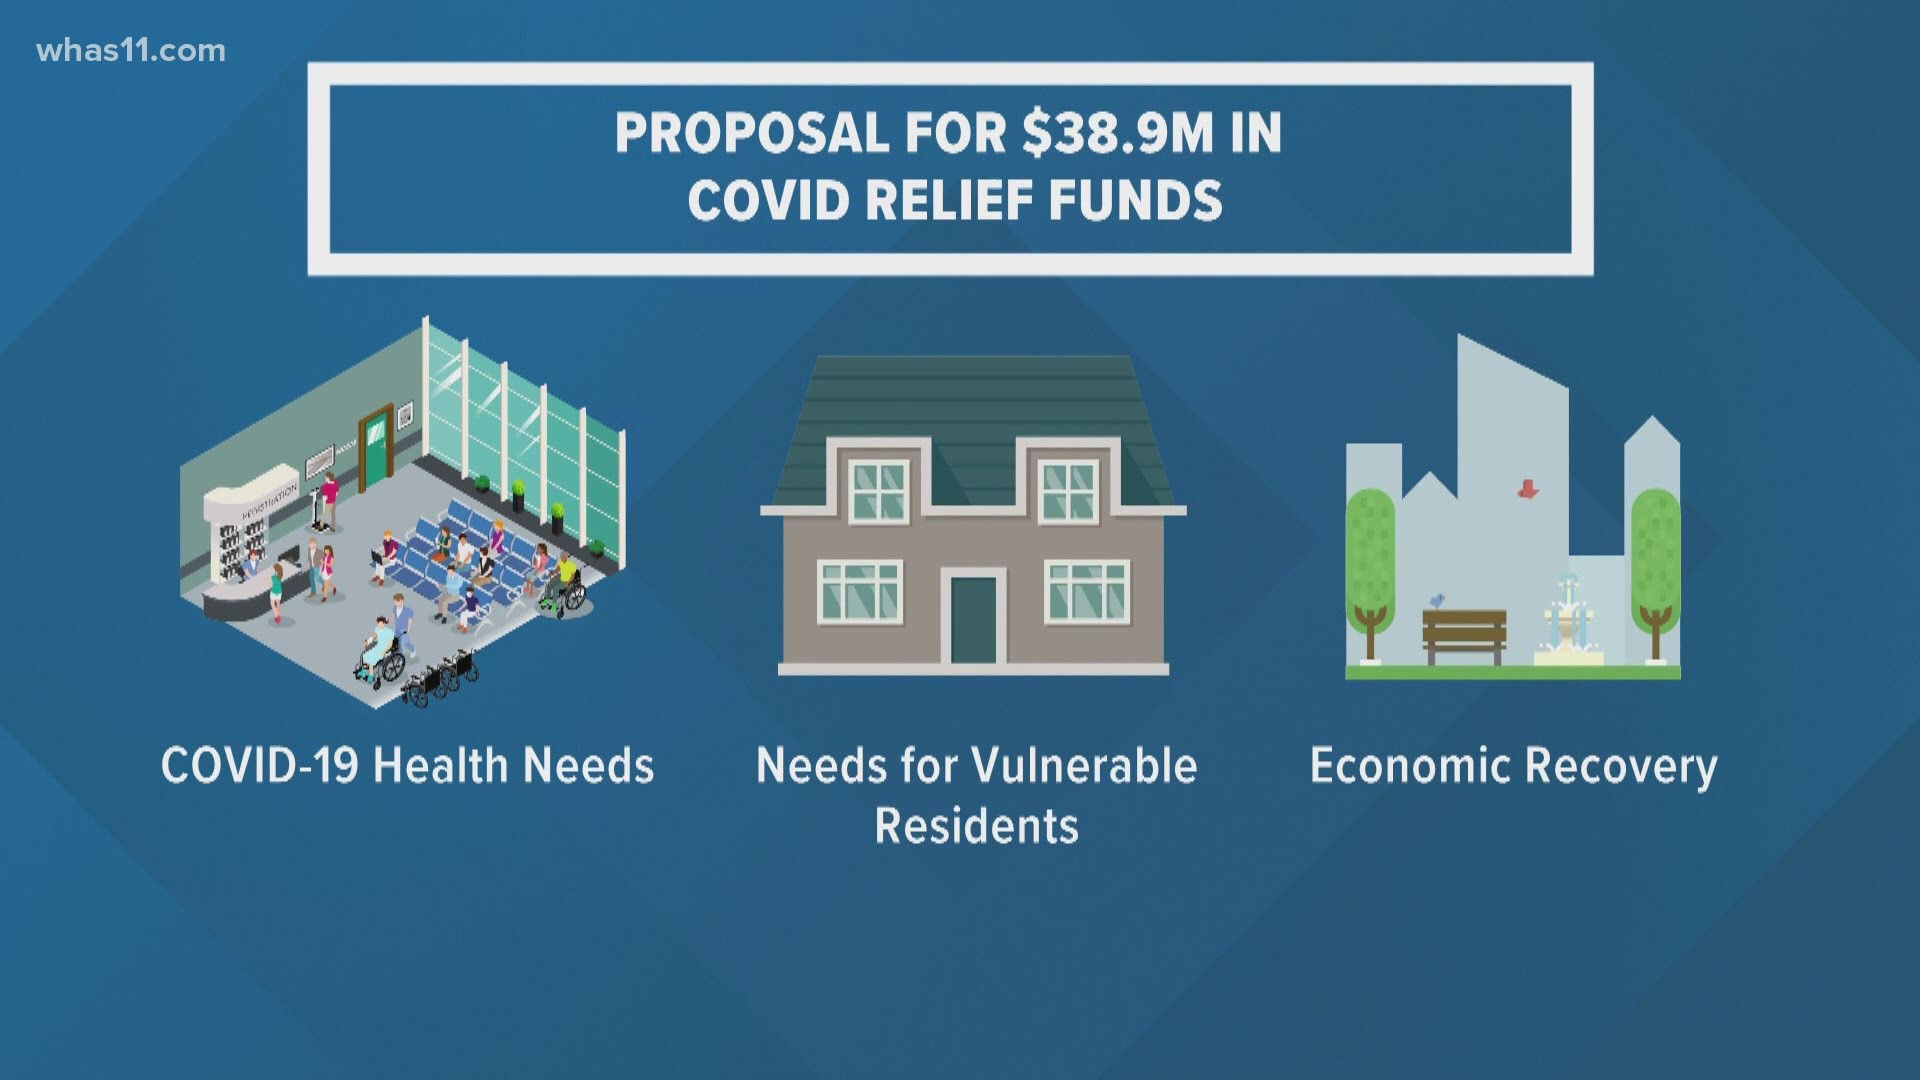 Mayor Greg Fischer laid out his plan to use a portion of the funding on COVID-19 vaccination efforts, housing and tourism.